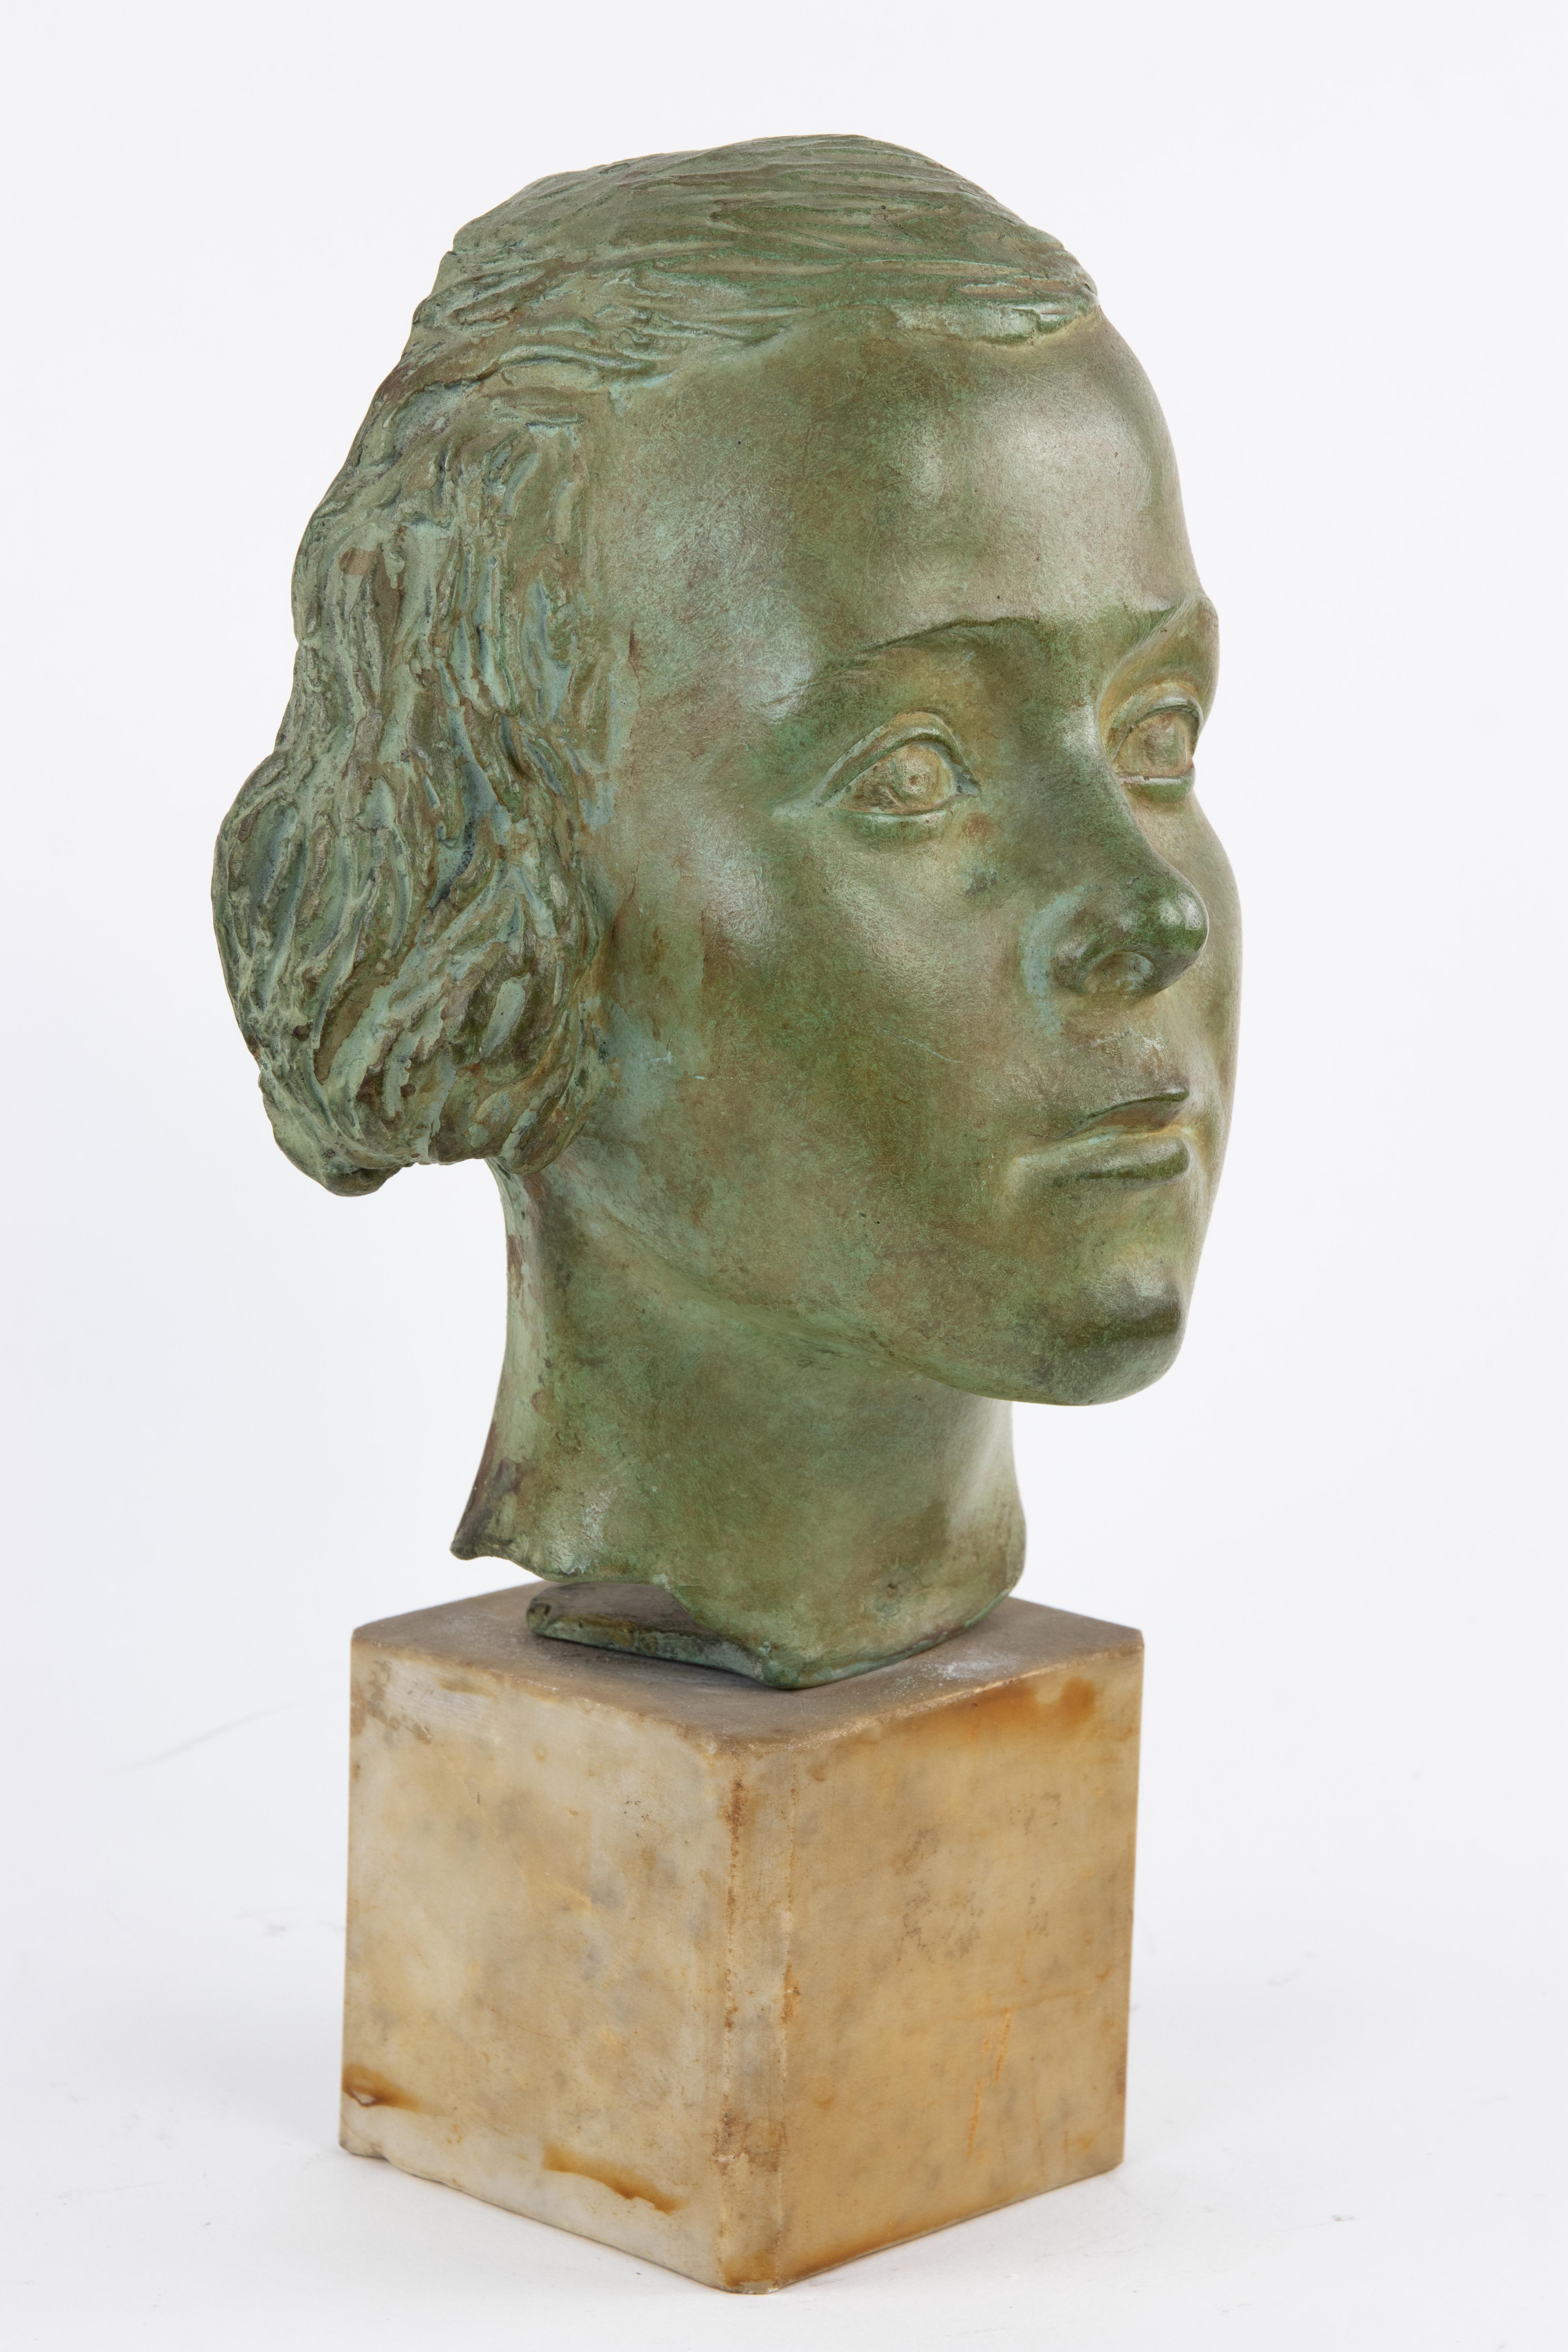 Nice bronze sculpture representing a young girl portrait, with a marble bottom.

Its creator, Attilio Torresini, was an Italian sculptor, who learned the marble art from the marbleworker father firstly and then to the Academy of Fine Arts in